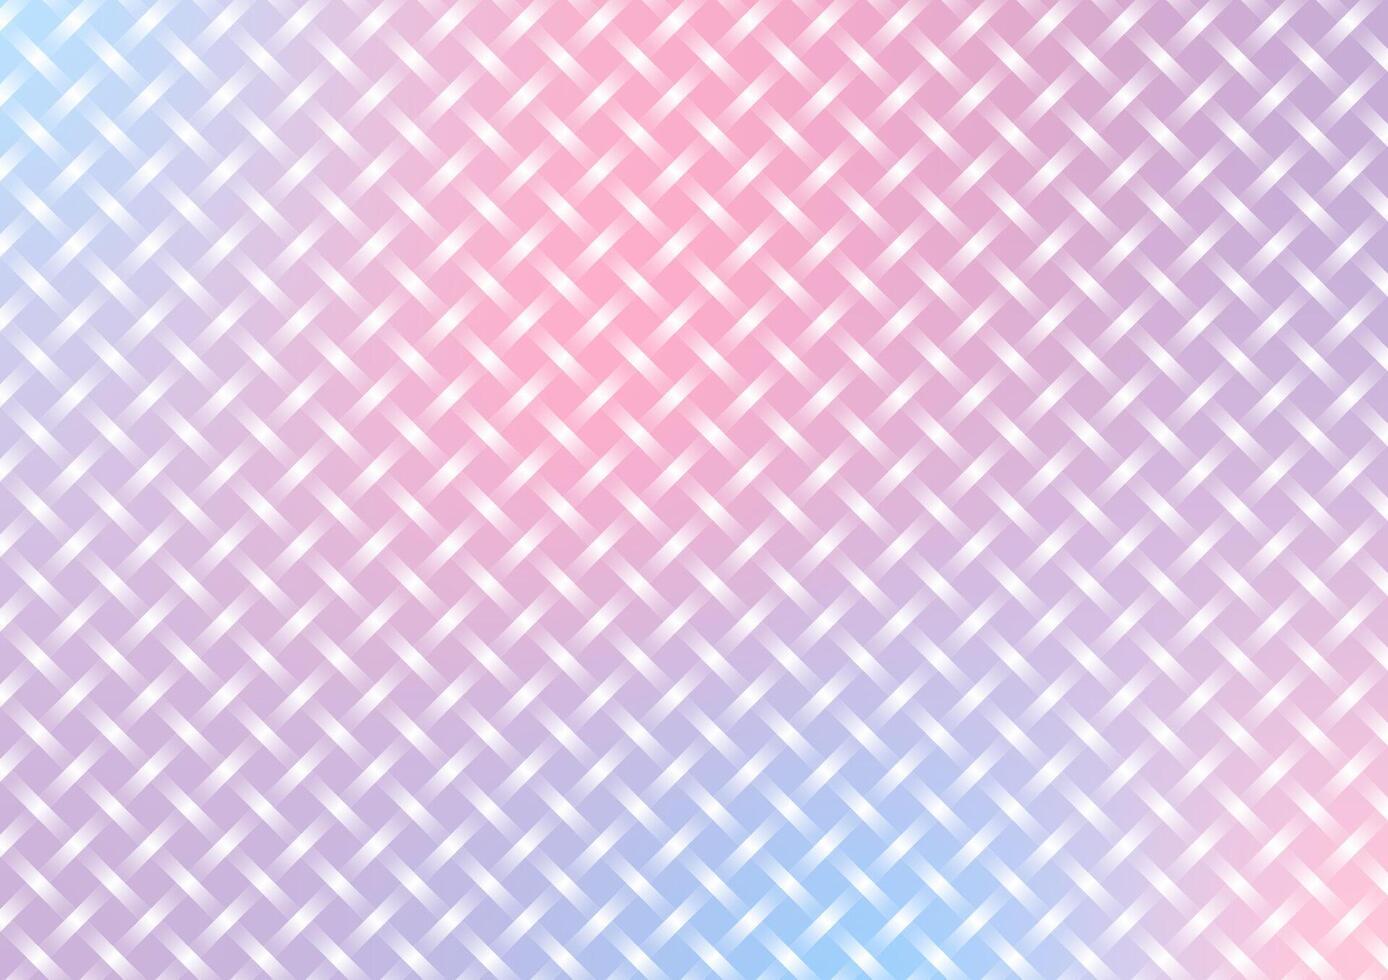 Pastel metal net abstract pink decorative background vector